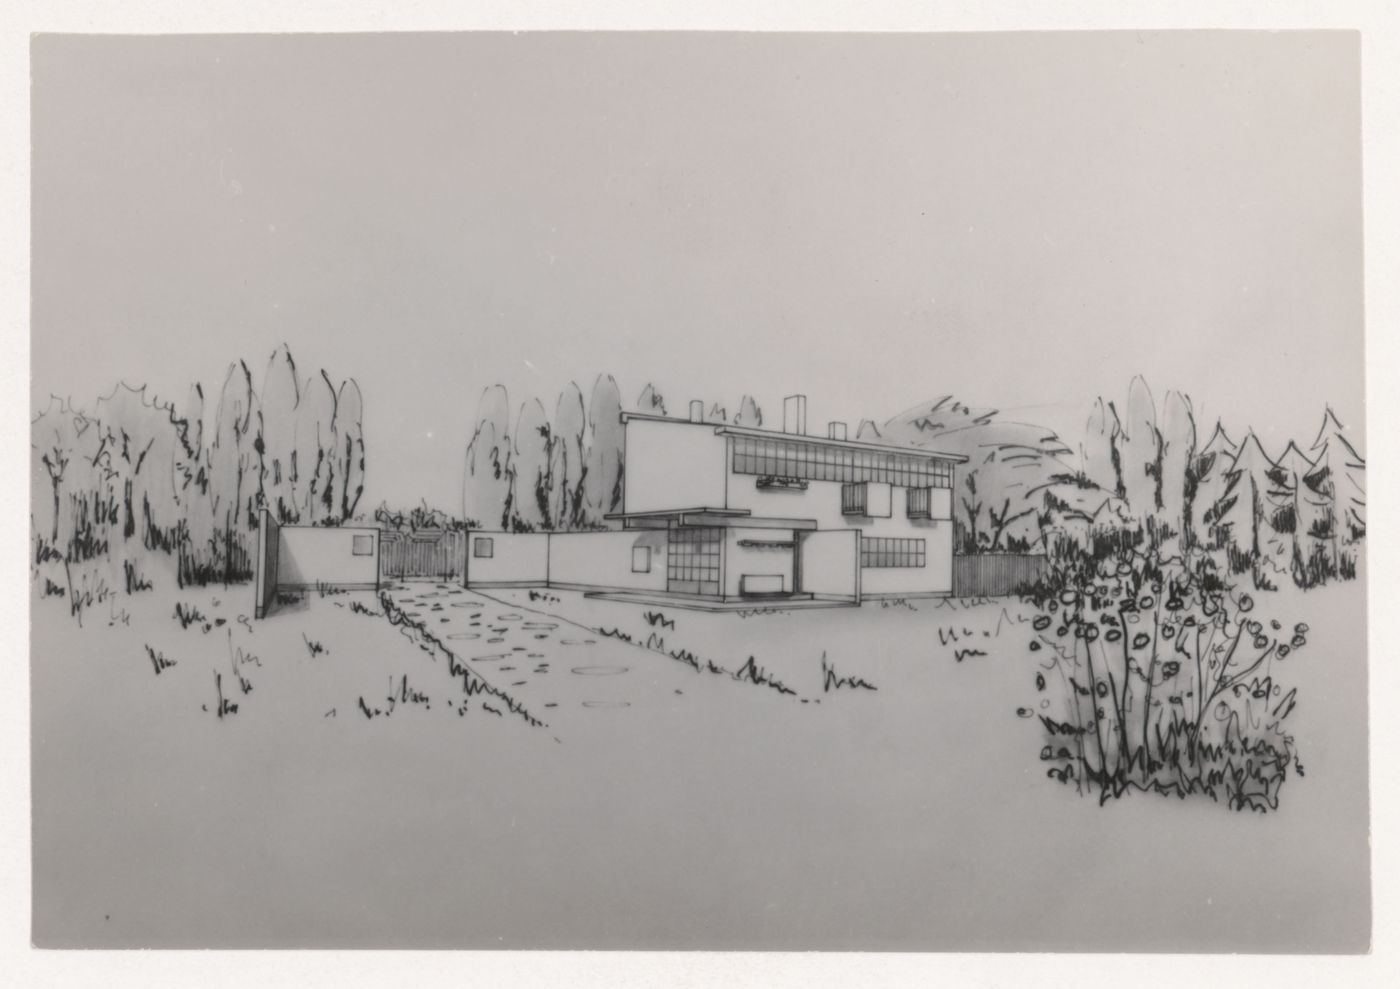 Photograph of a perspective drawing for the De Hoge Veluwe park-keeper's house, Otterloo, Netherlands